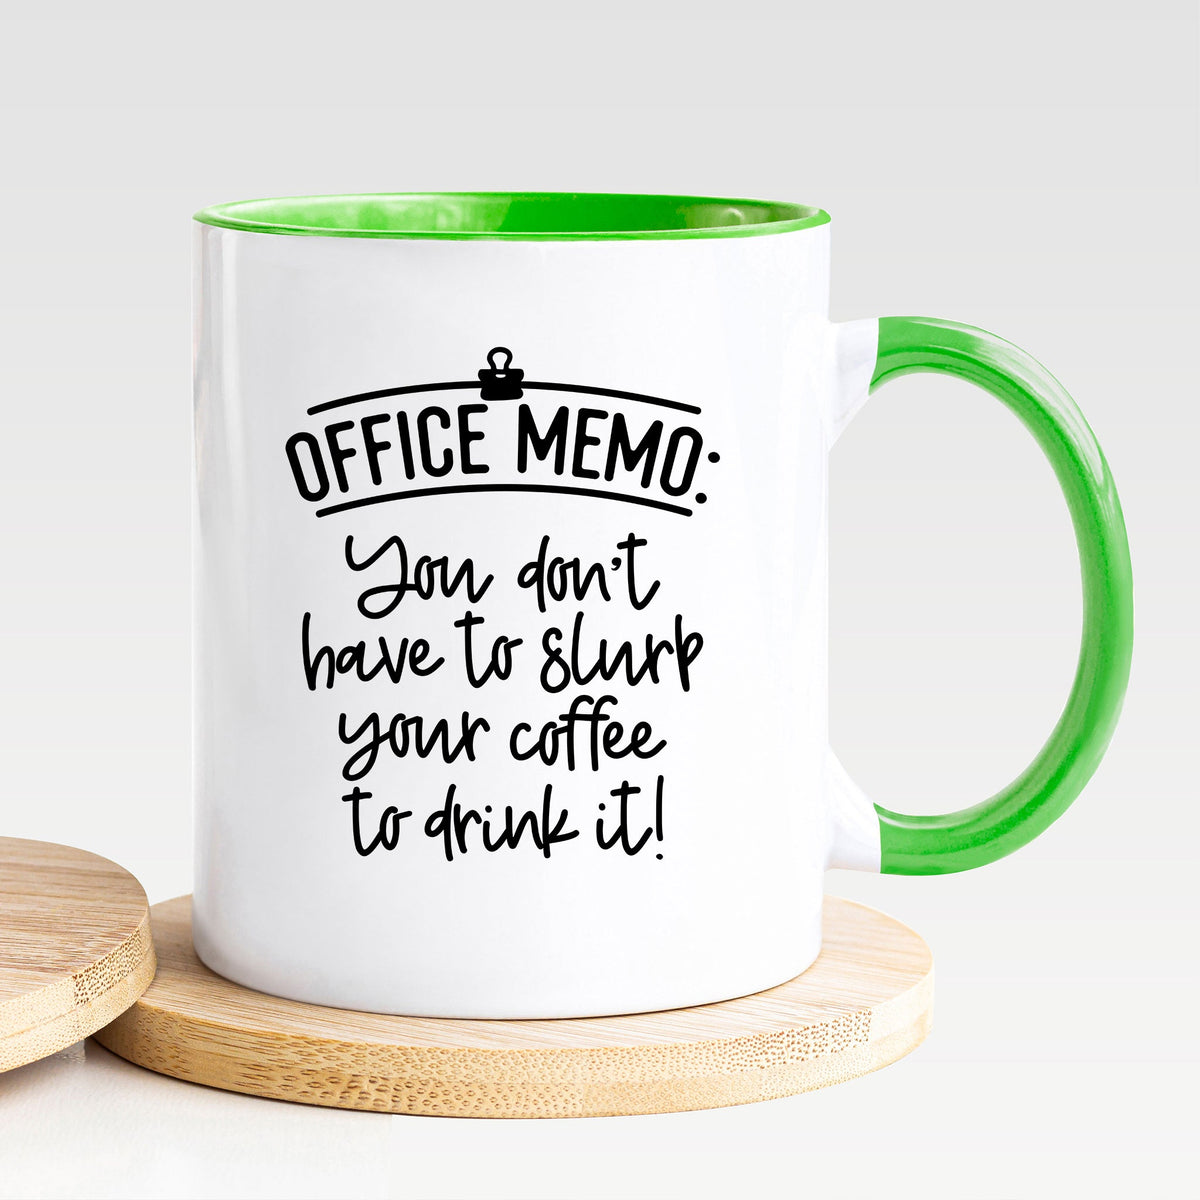 You Don't Have To Slurp Your Coffee To Drink It - Mug